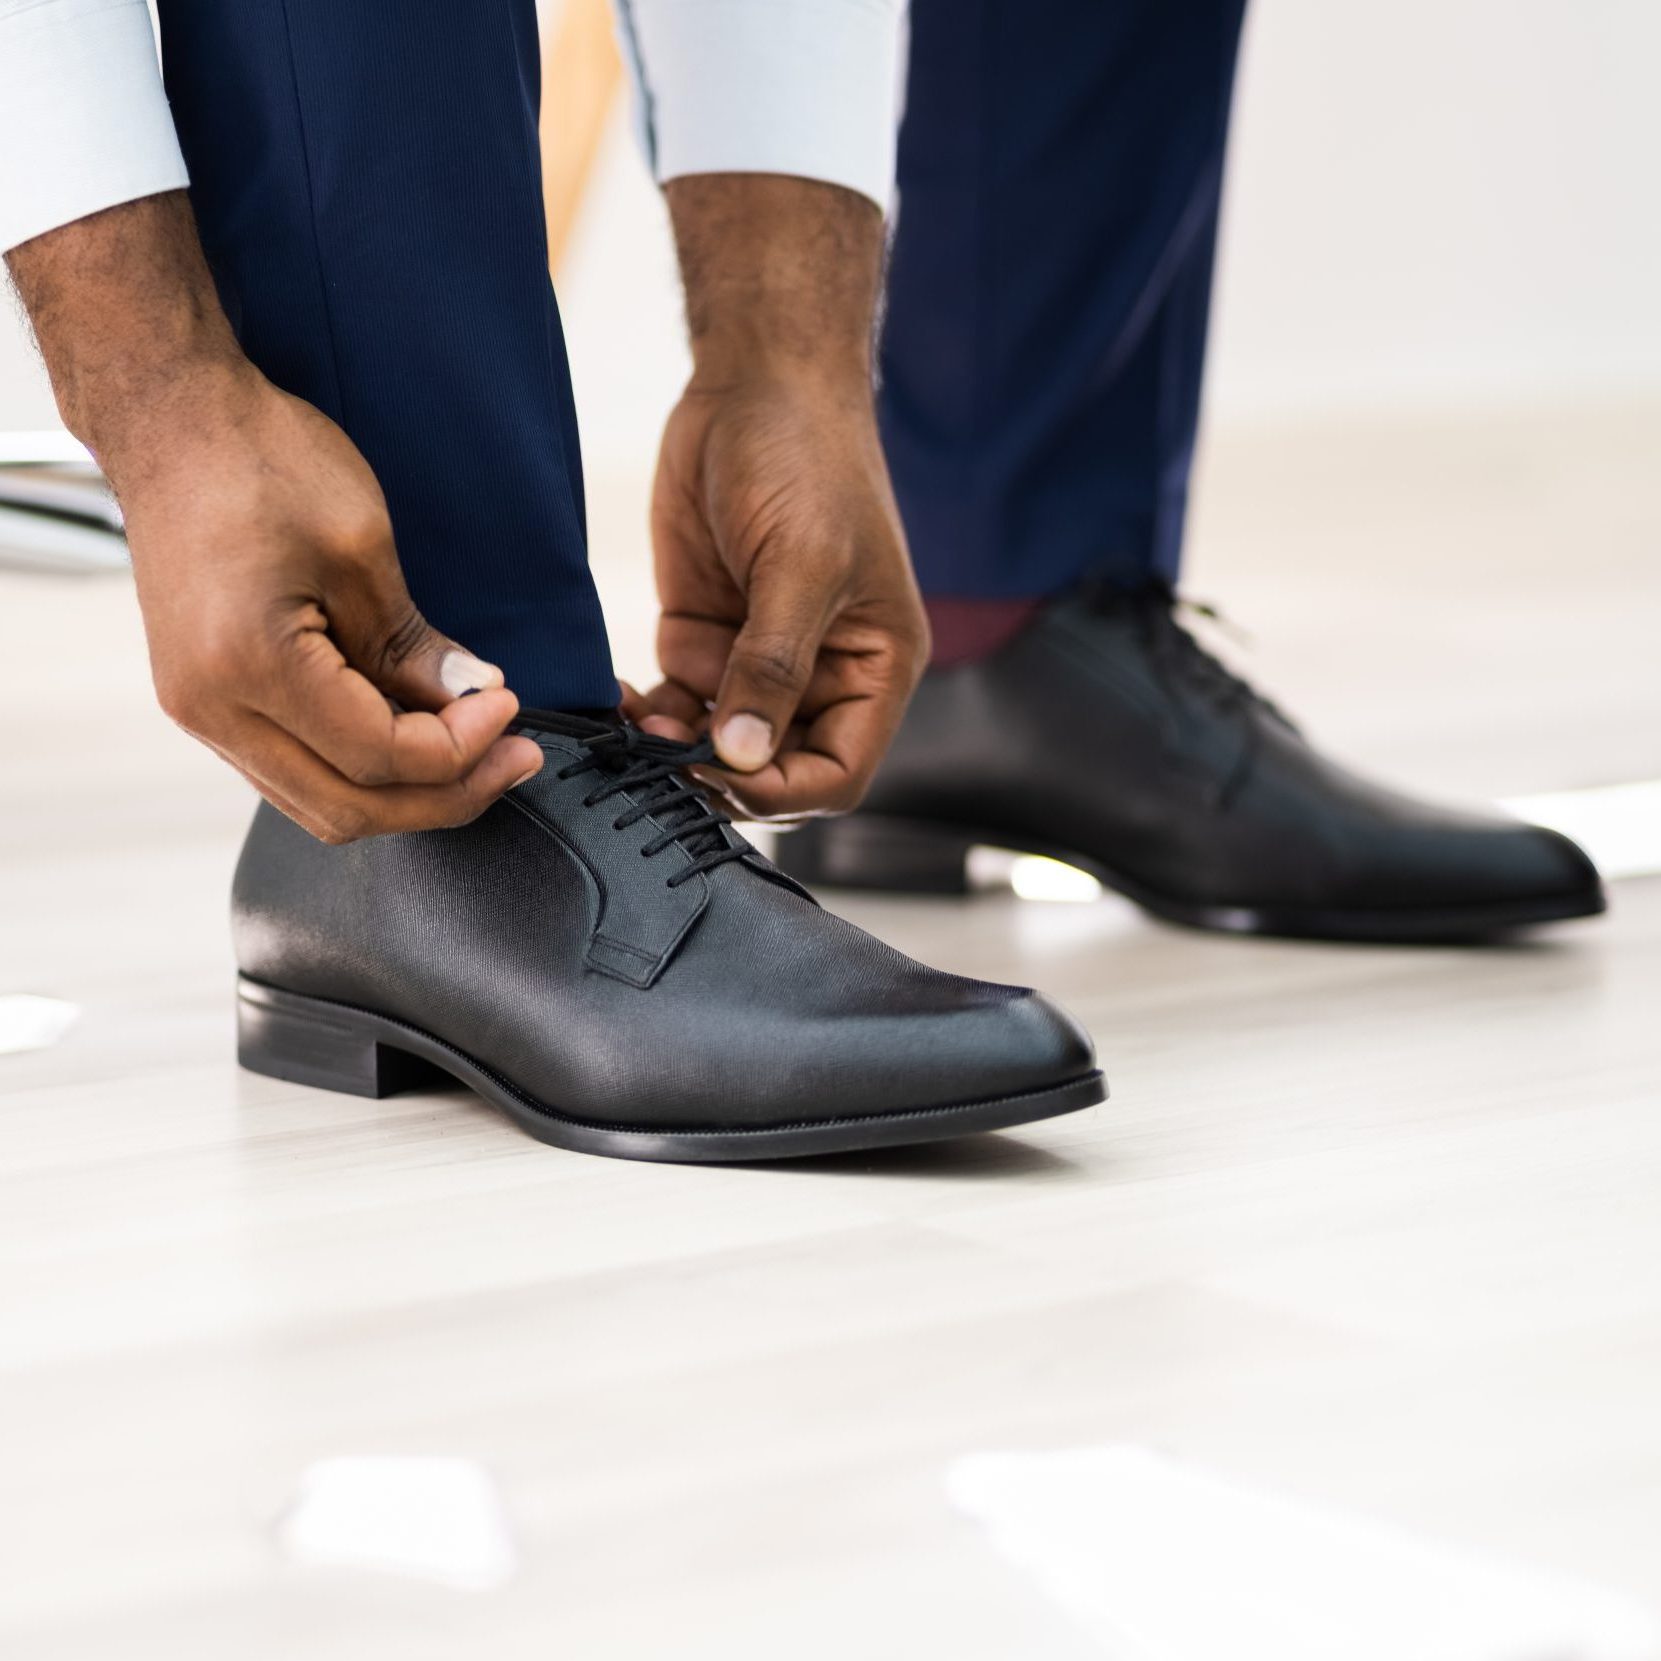 8 Of The Best Office Shoes For Men | Style Rave